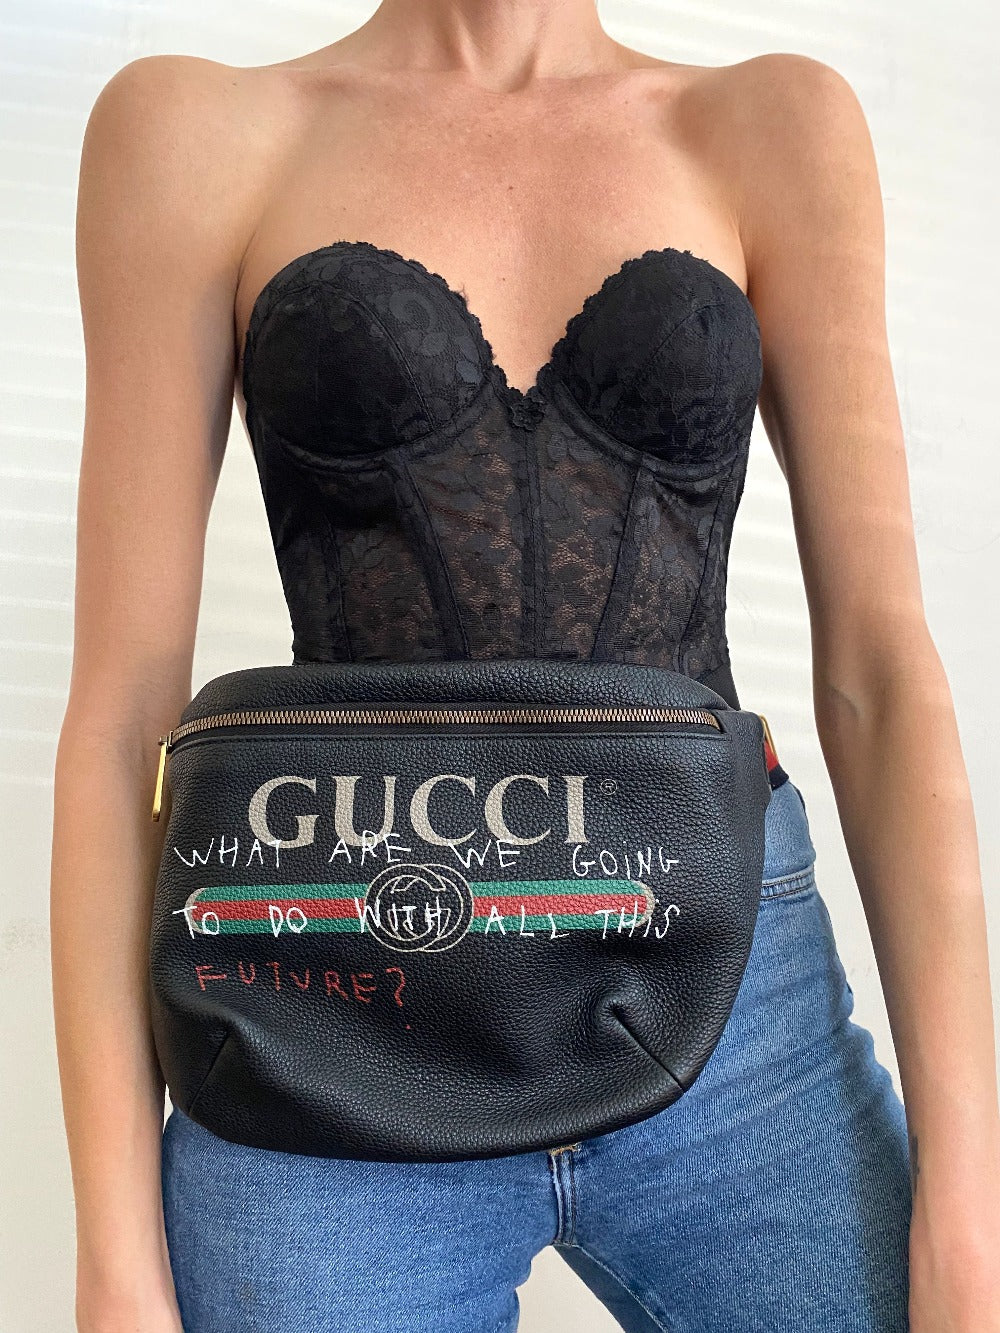 The Best Designer Fanny Pack You Need Right Now - Gucci Belt Bag